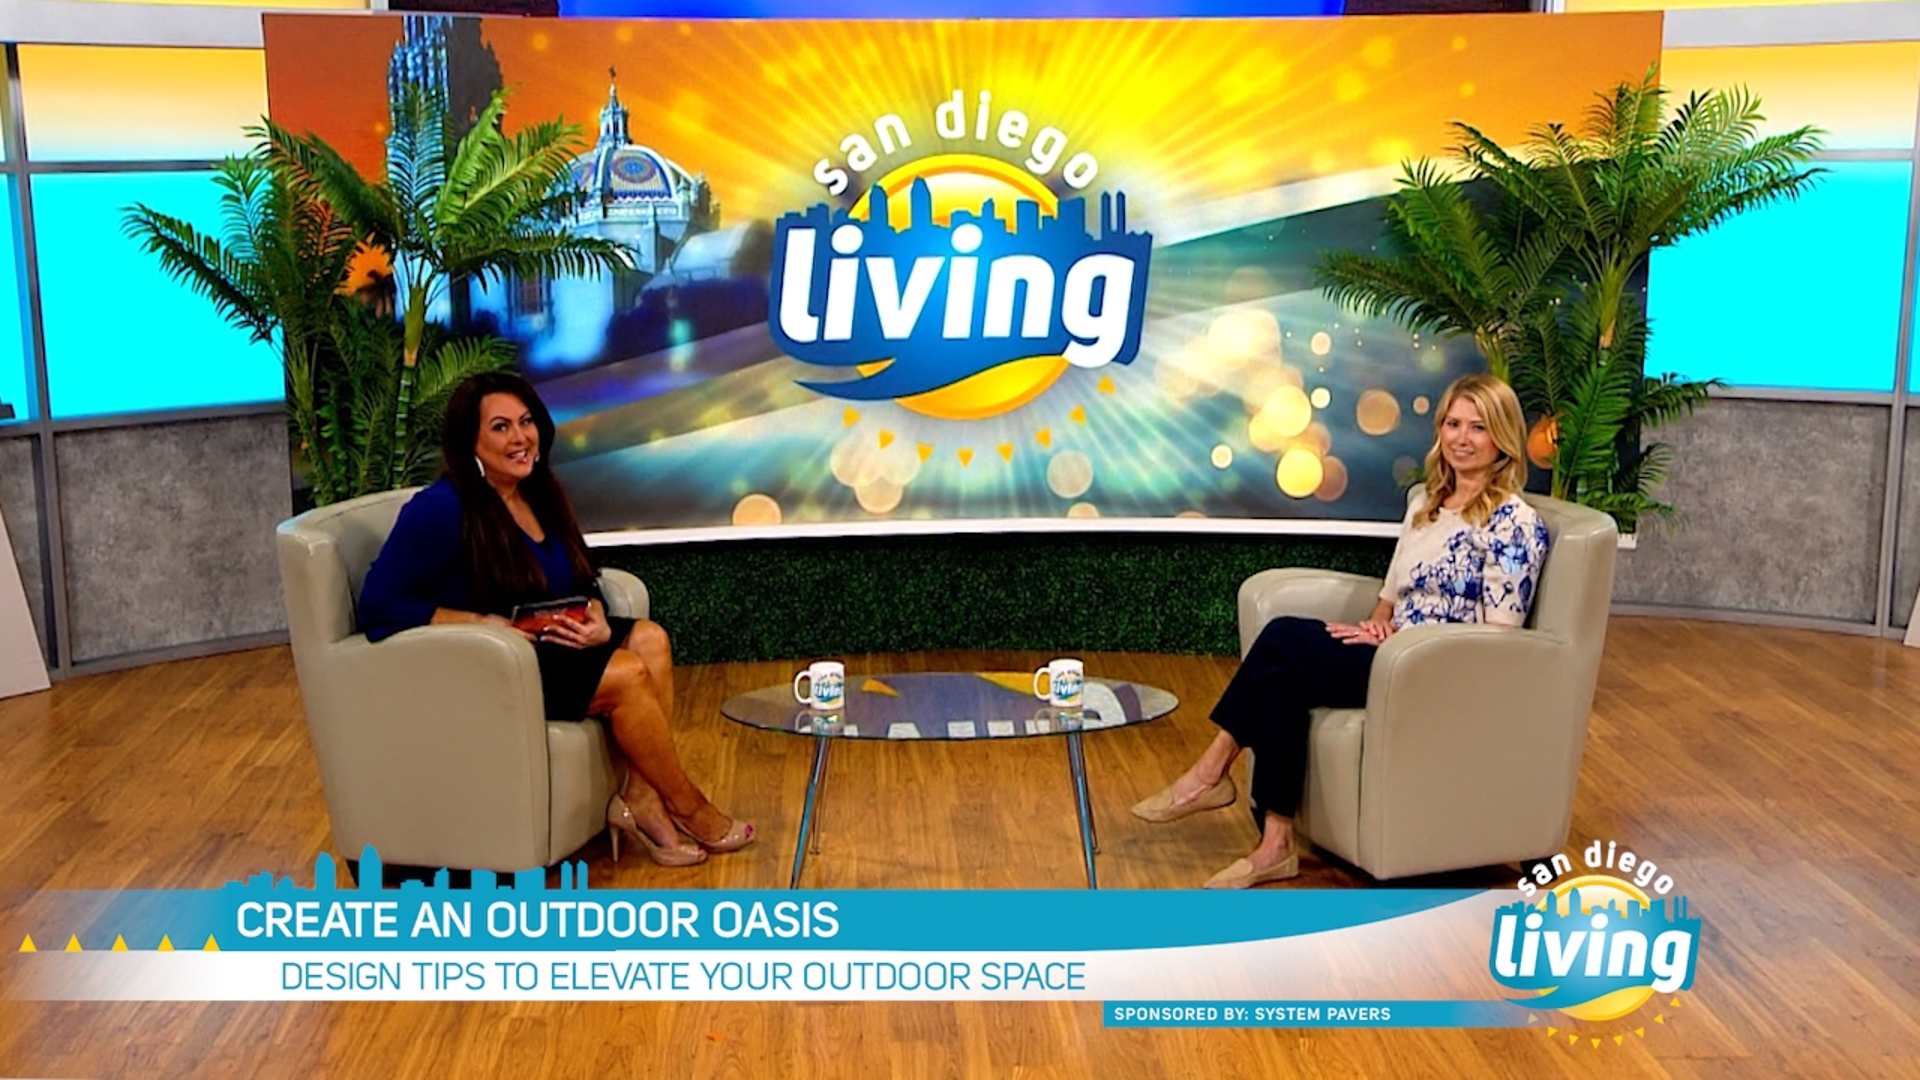 Jennifer Ressler, Regional Vice President of System Pavers, joins our Laura Cavanaugh to talk about easy outdoor upgrades. Sponsored by: System Pavers